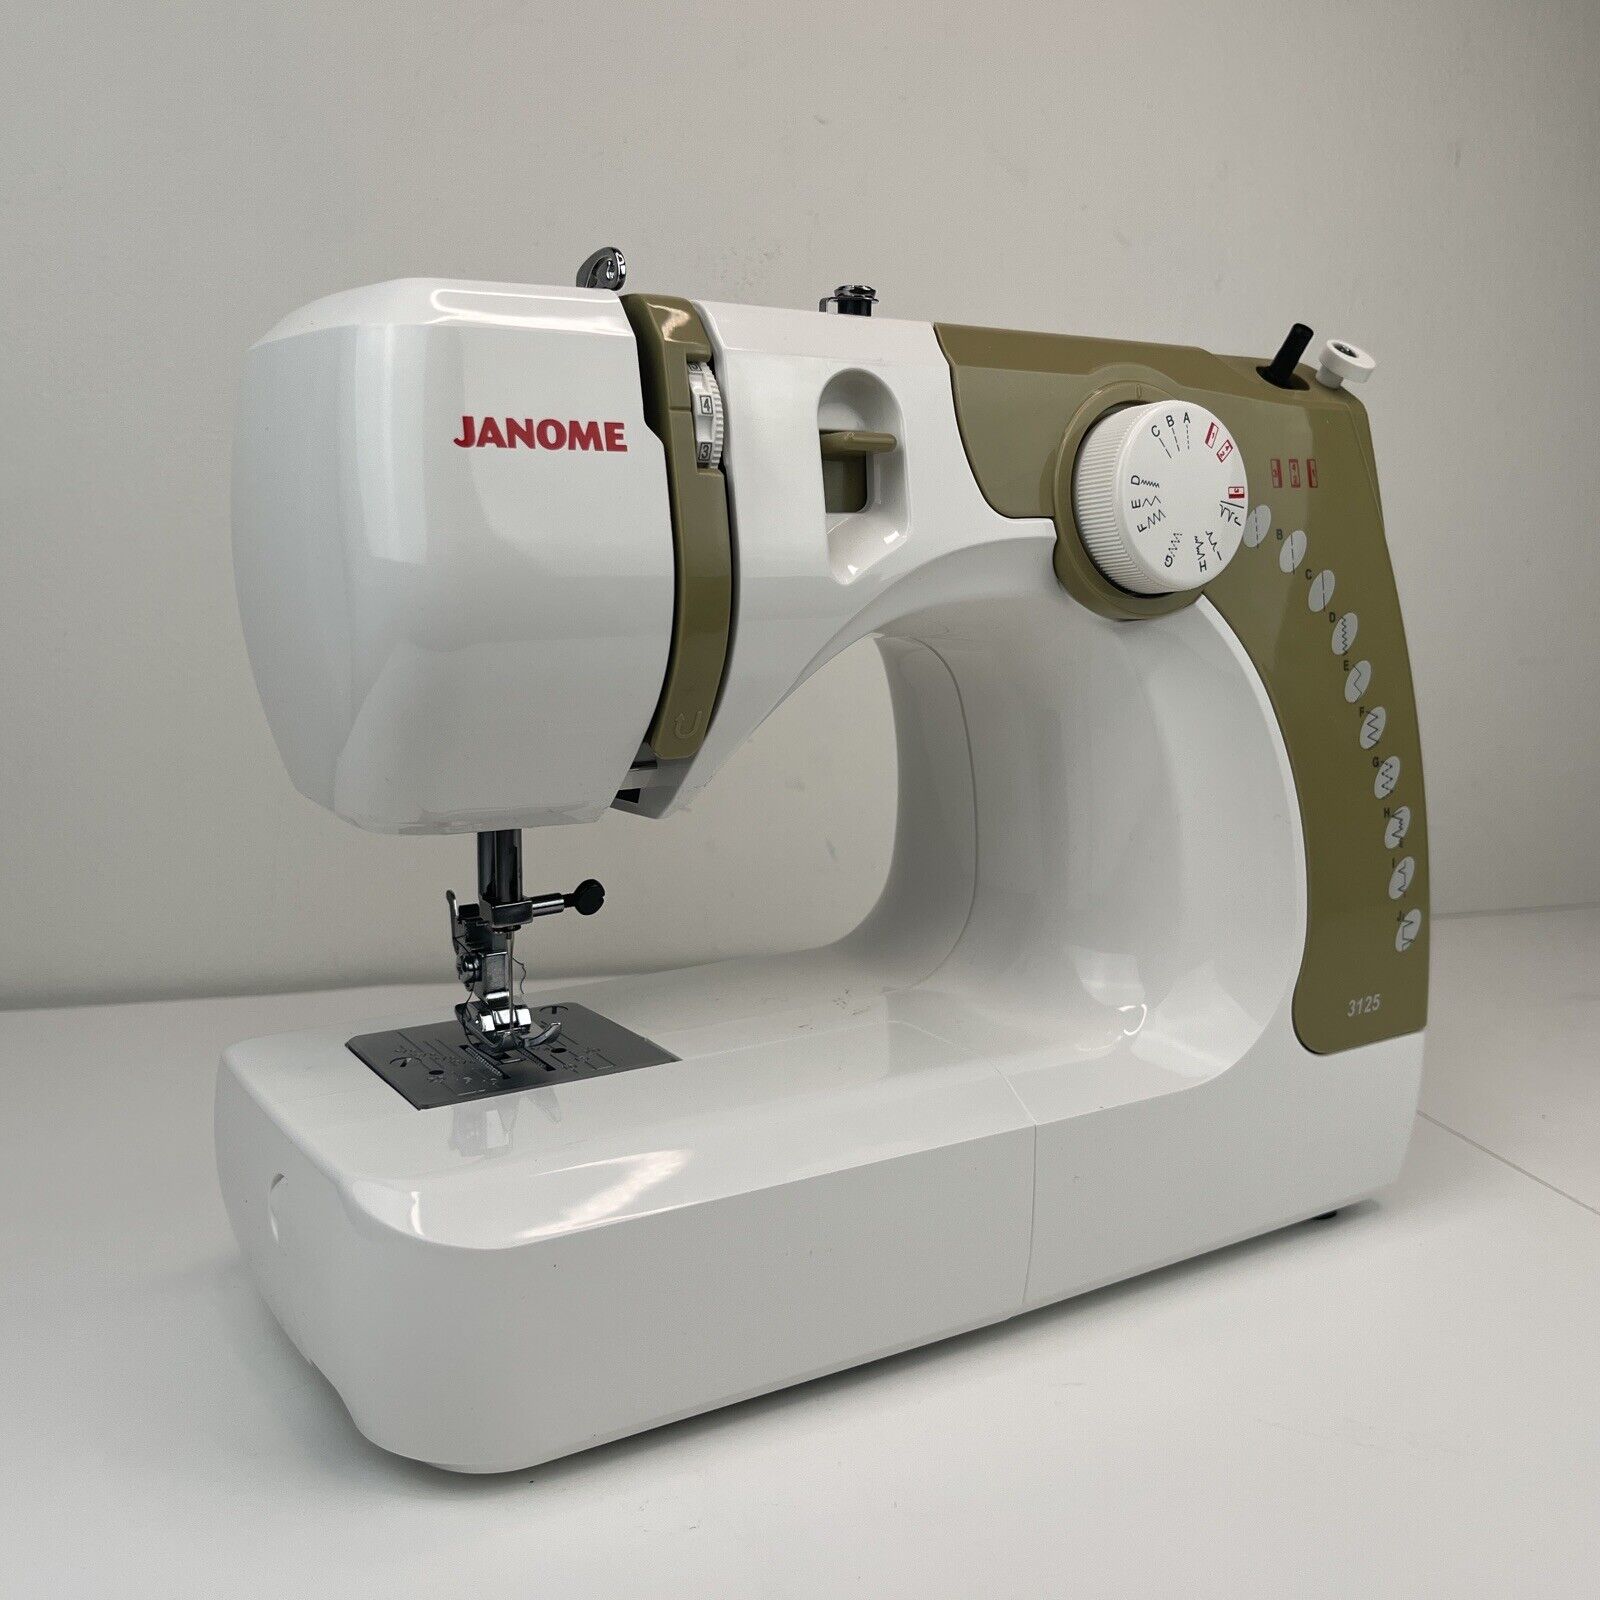 Threading a Janome (New Home) 3125 Sewing Machine